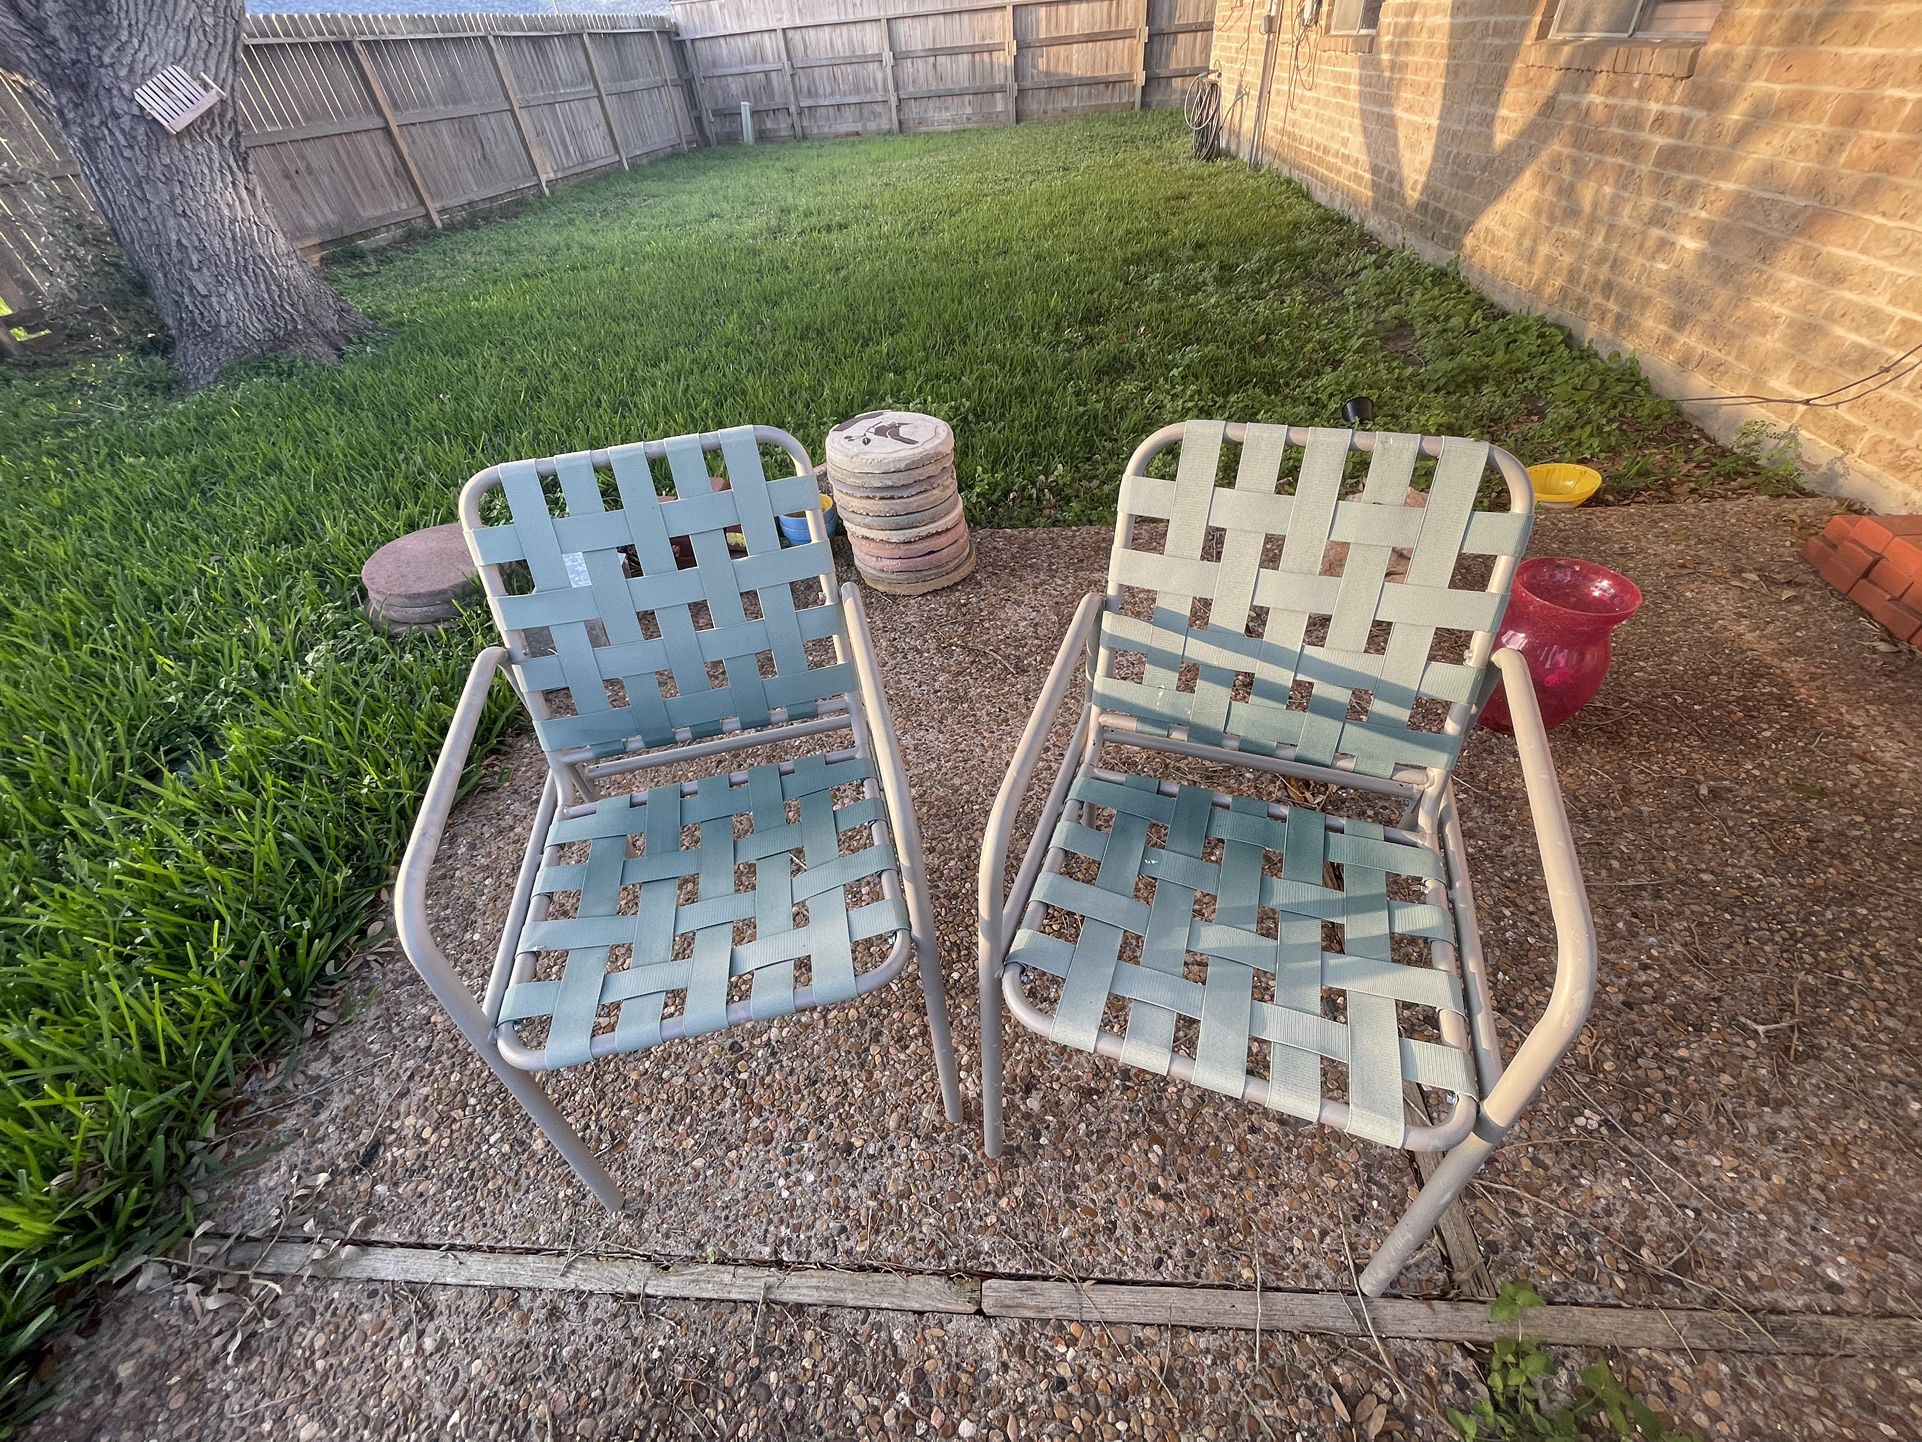 Strapping Patio Chairs